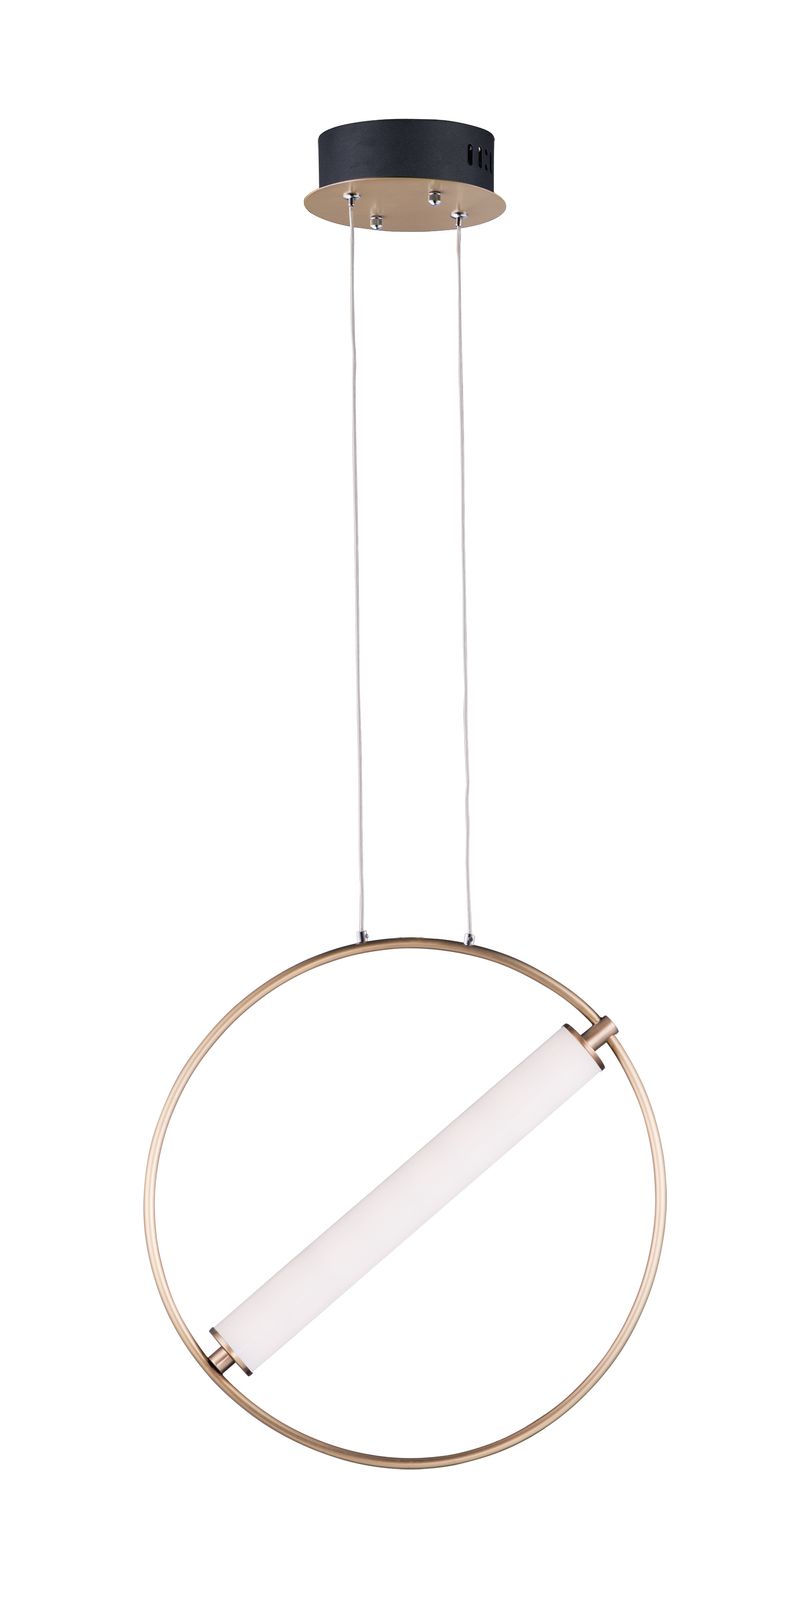 Flare 17.75' Single Light Pendant in Black and Soft Gold